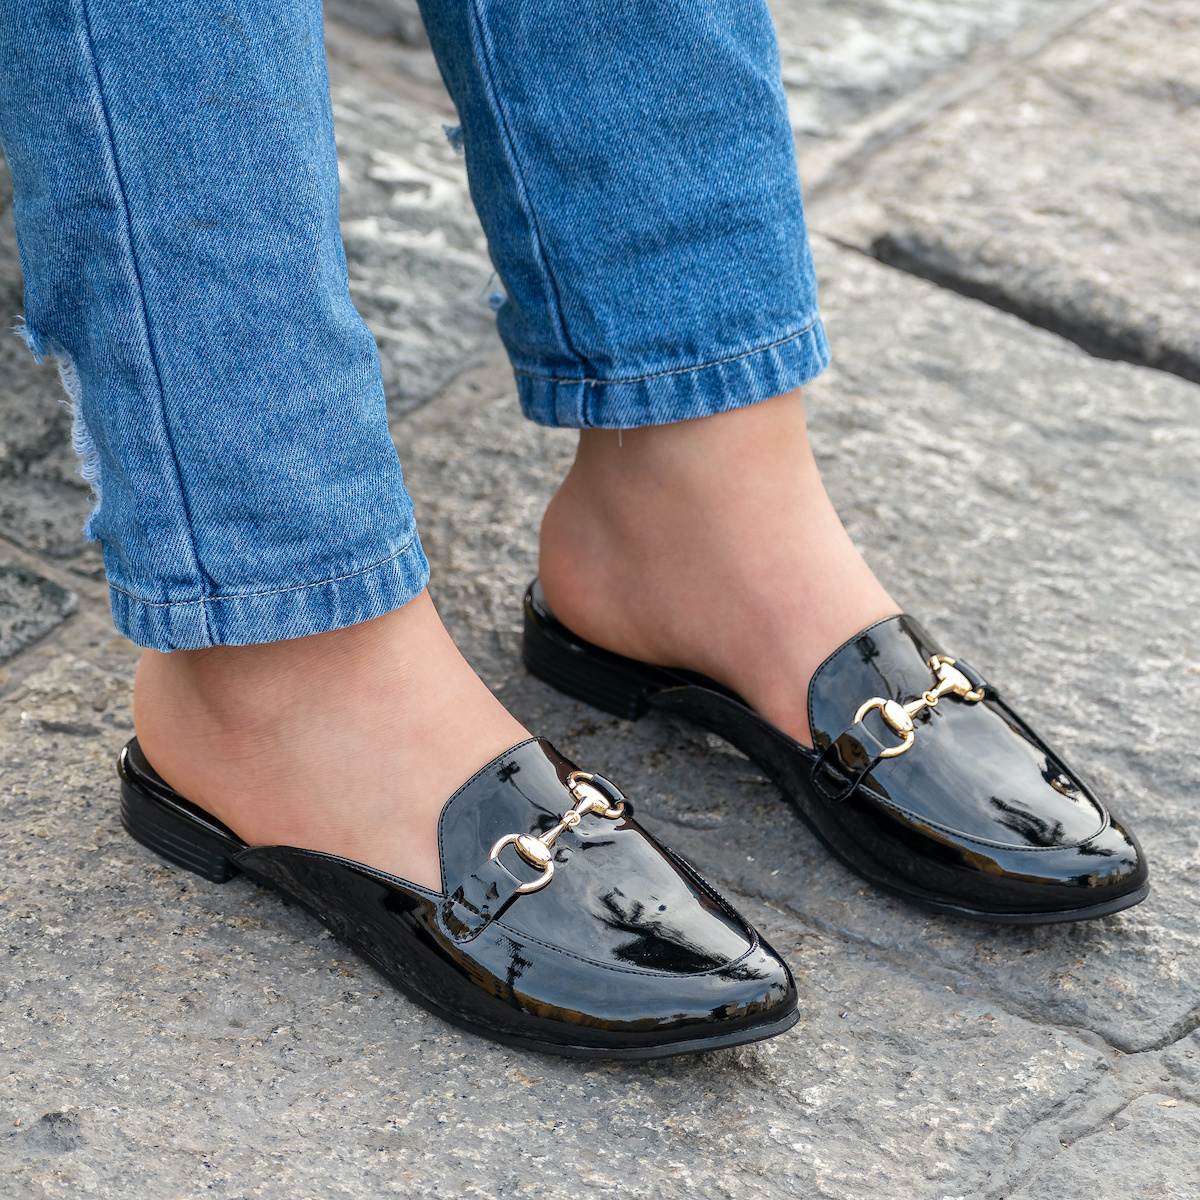 How to Wear Mules, Shoe Zone